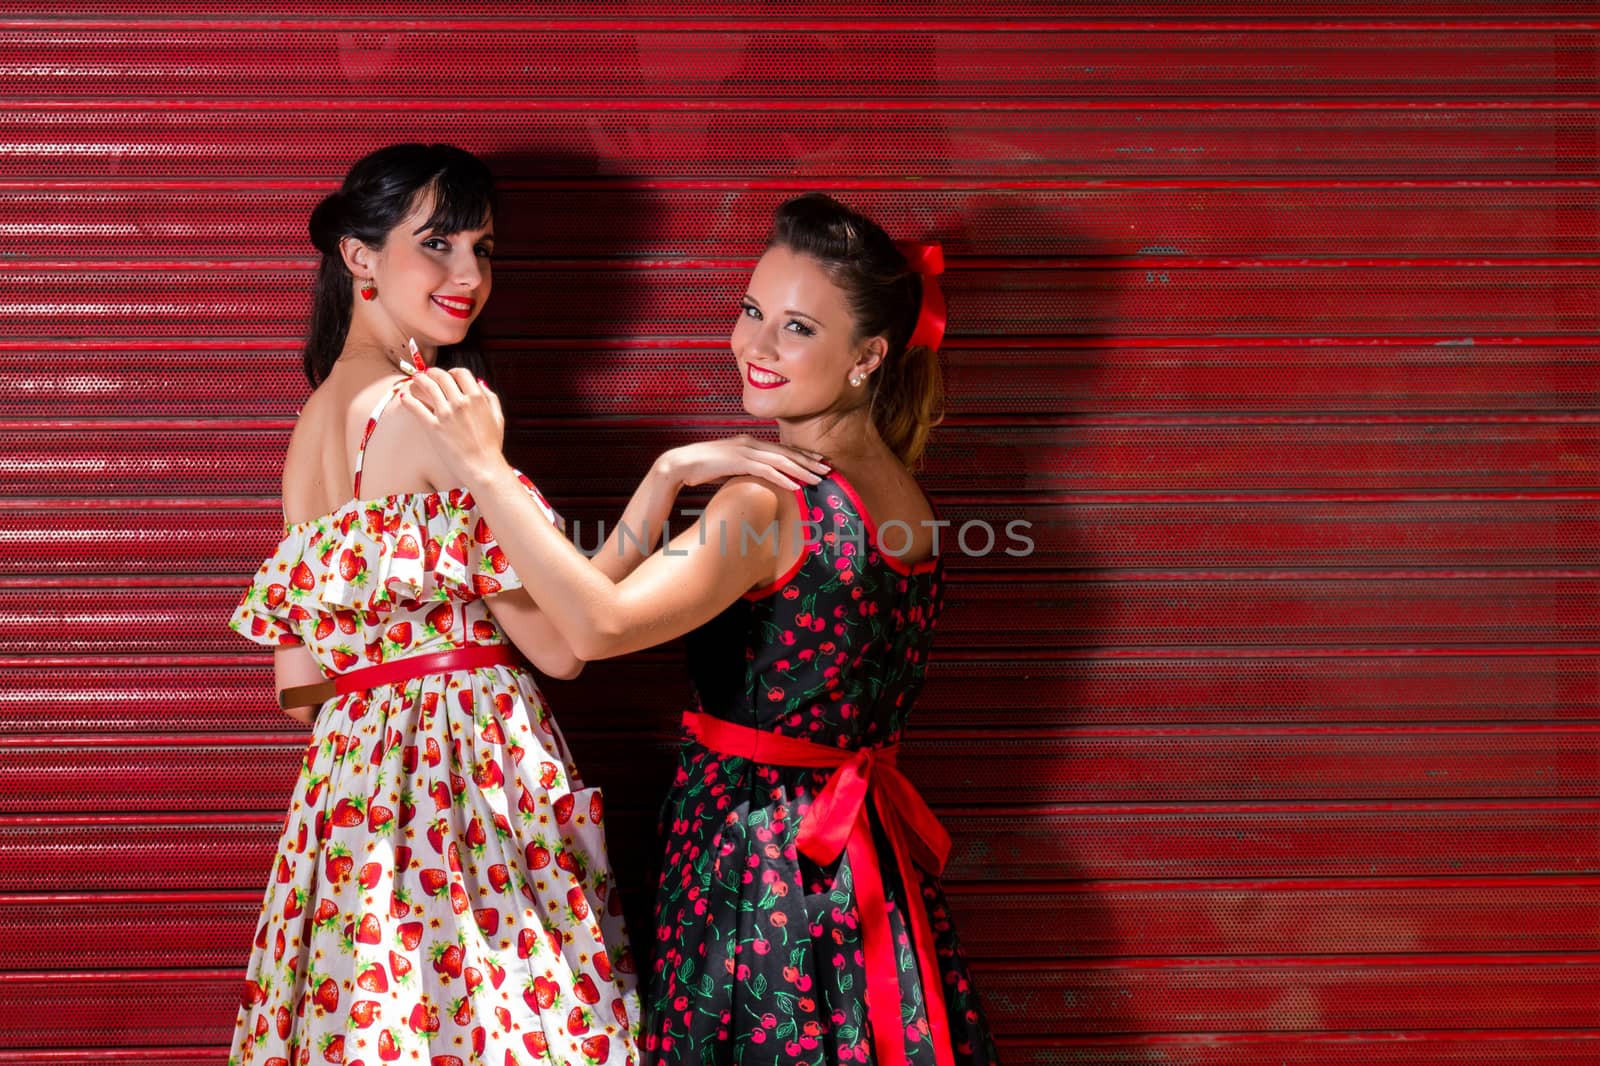 Women posing with a vintage style retro floral clothing.